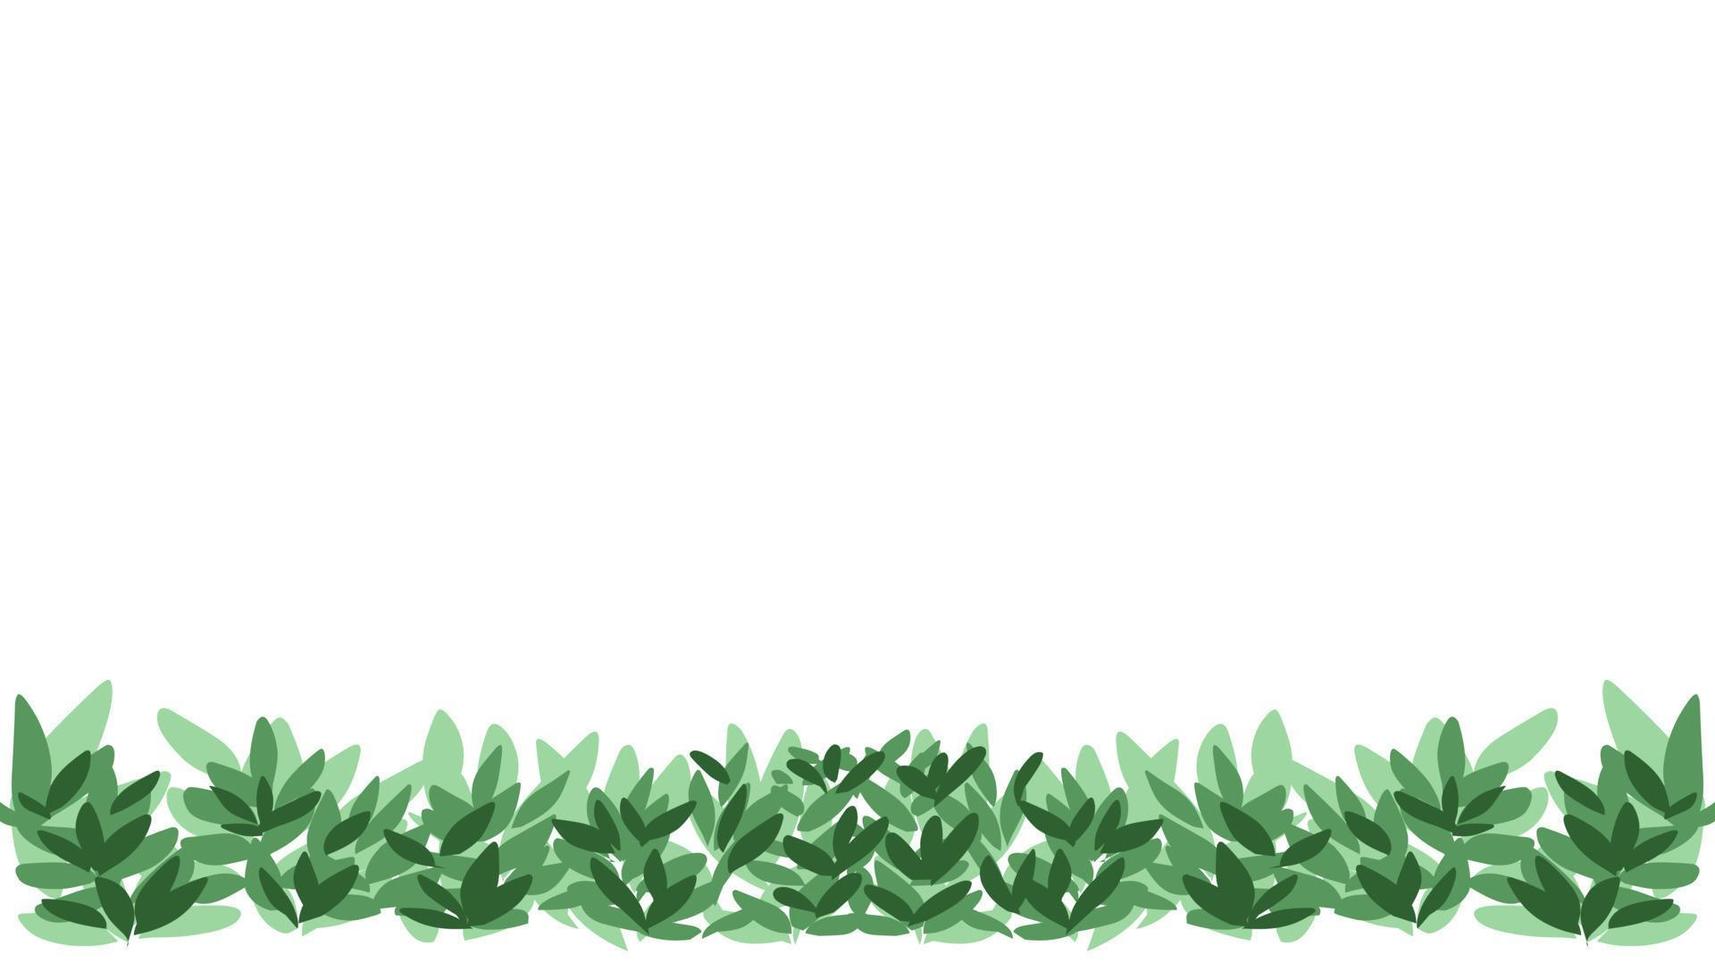 Background illustration with lots of grass leaves vector